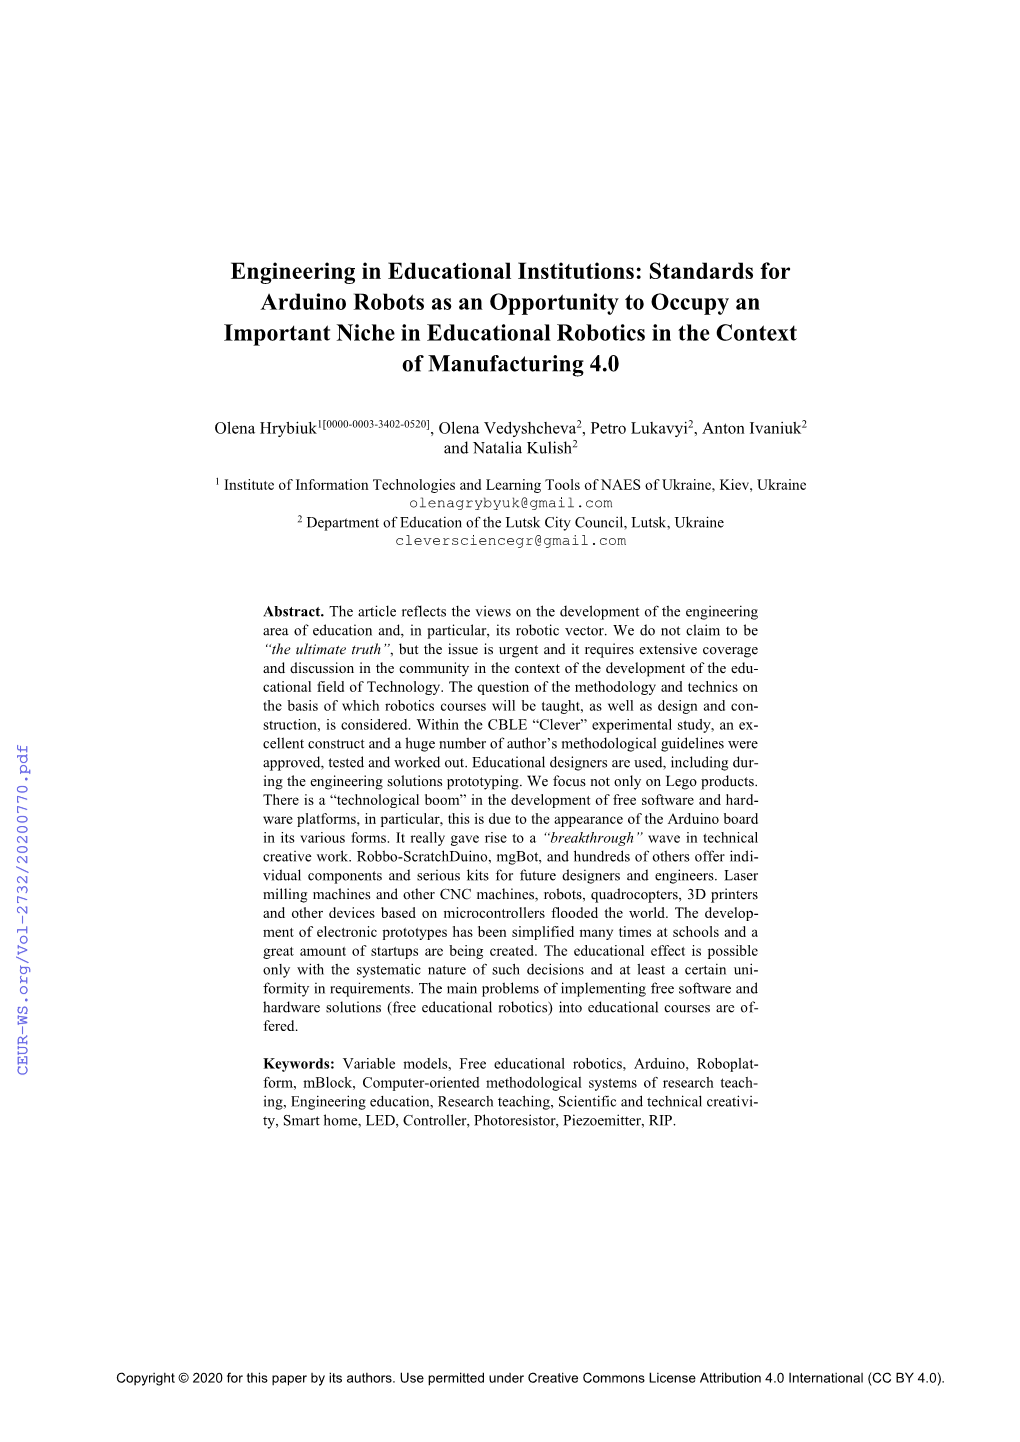 Engineering in Educational Institutions: Standards for Arduino Robots As